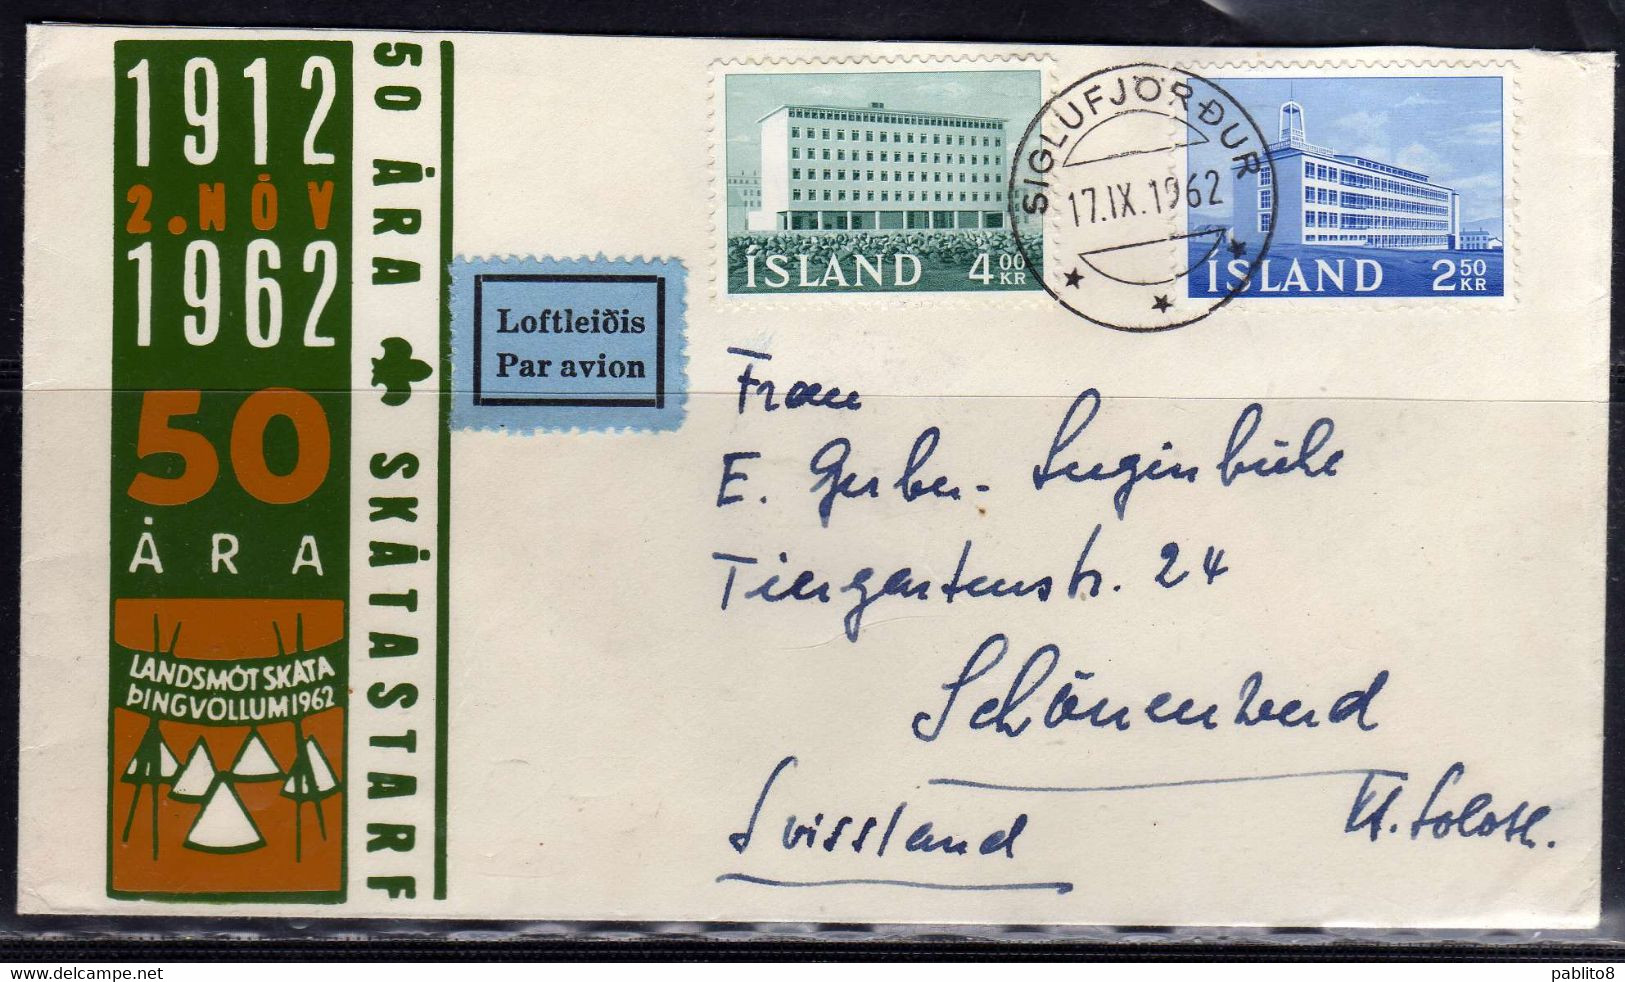 ISLANDA ICELAND ISLANDE 1962 NEW BUILDINGS PRODUCTION INSTITUTE FISHING REASEARCH 2.50 + 4k PAR AVION AIR MAIL COVER - Storia Postale